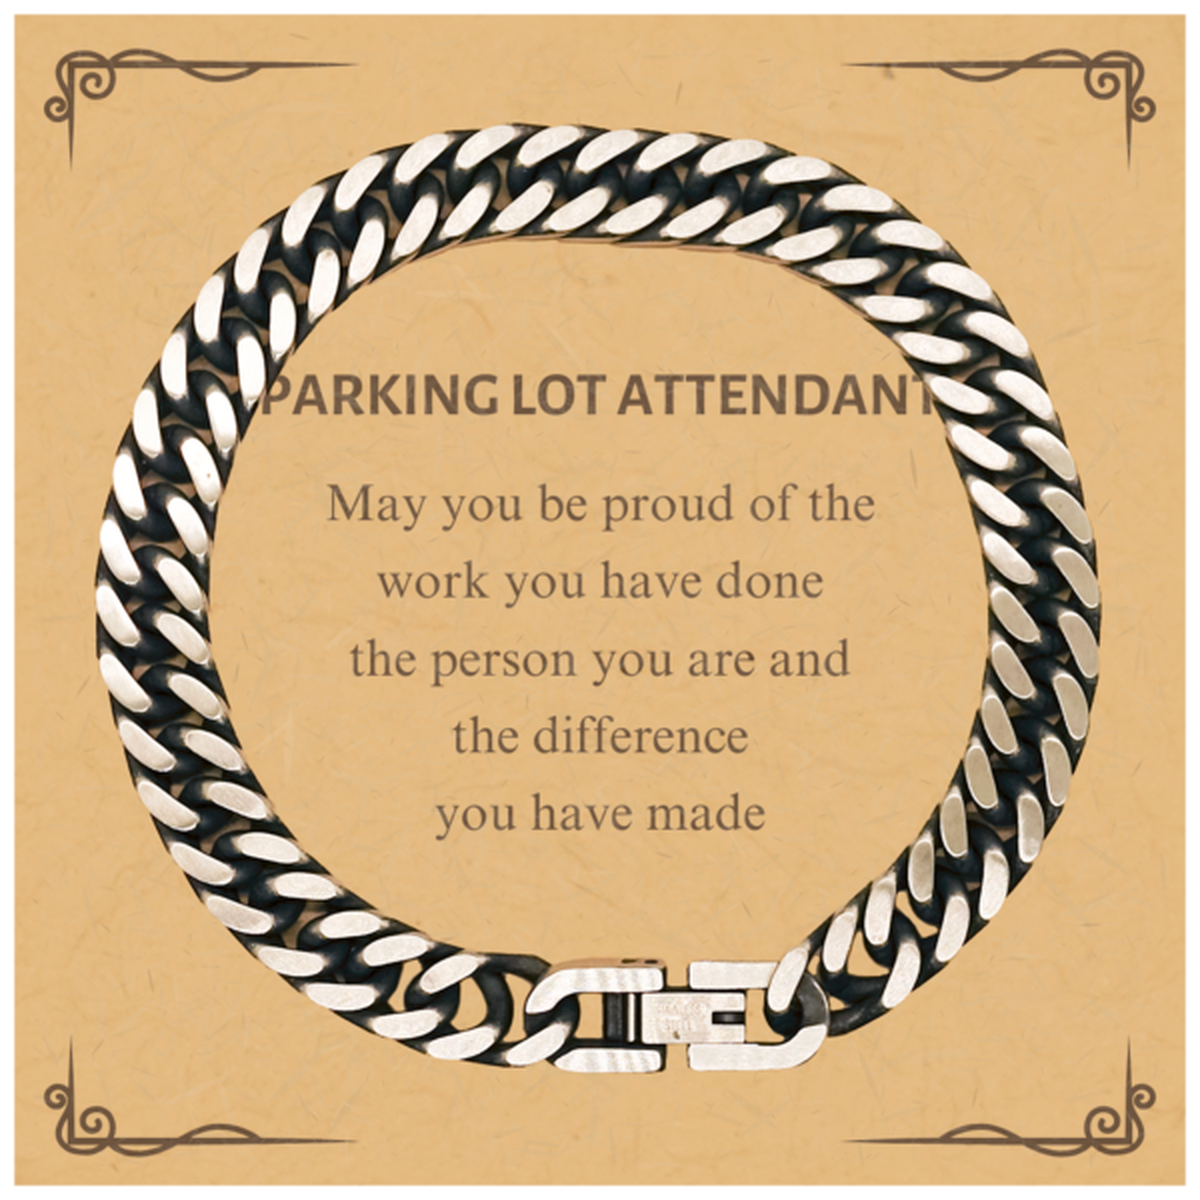 Parking Lot Attendant May you be proud of the work you have done, Retirement Parking Lot Attendant Cuban Link Chain Bracelet for Colleague Appreciation Gifts Amazing for Parking Lot Attendant